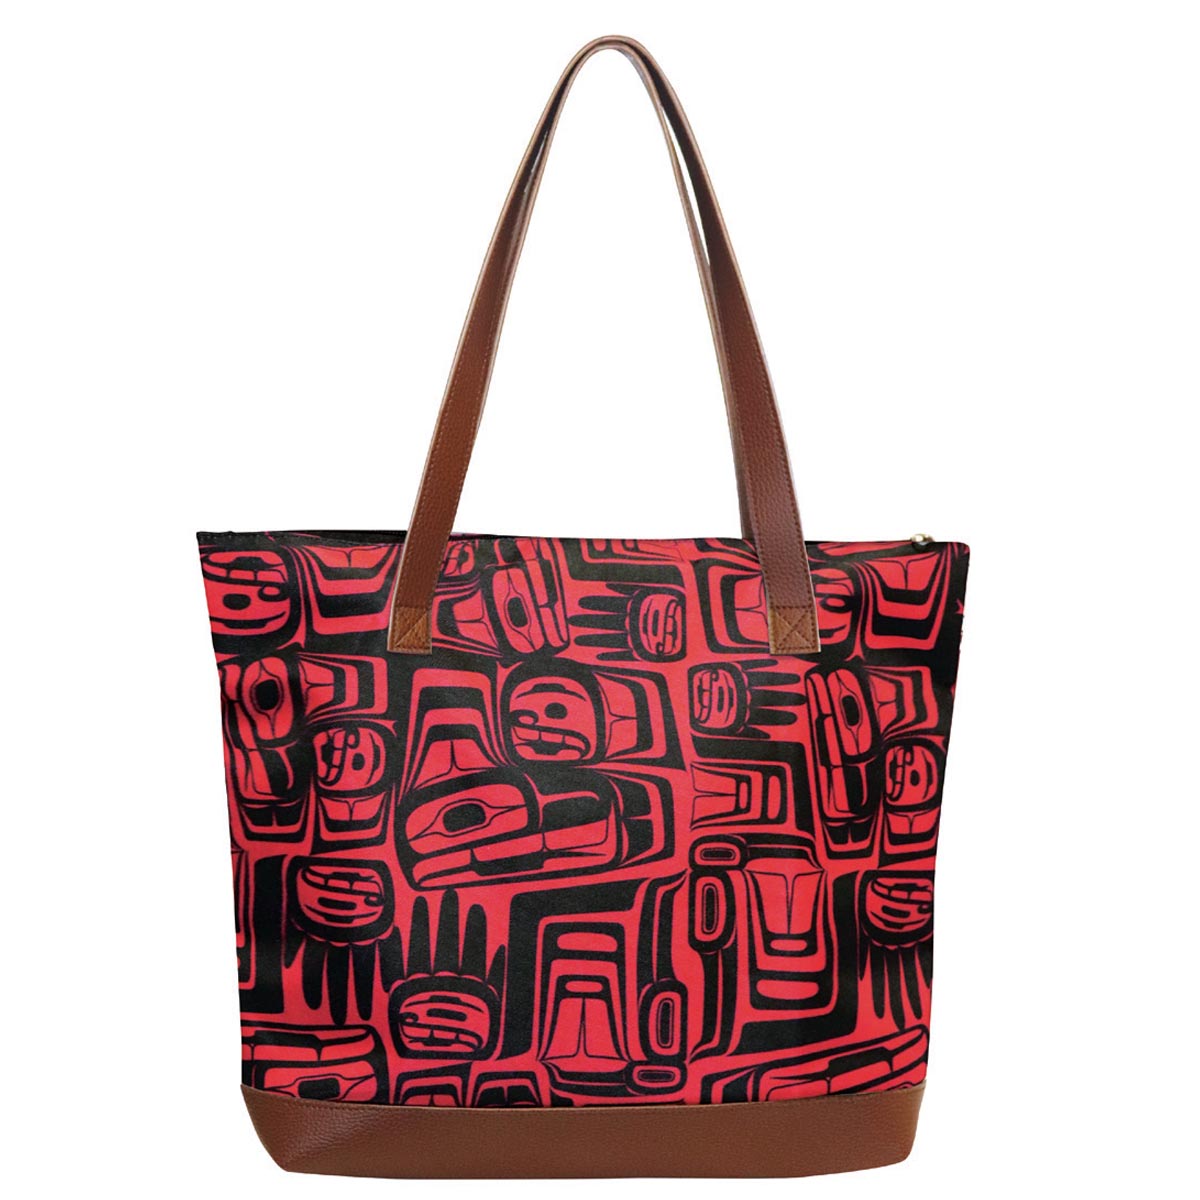 Tote Bag Eagle Crest - Tote Bag Eagle Crest -  - House of Himwitsa Native Art Gallery and Gifts